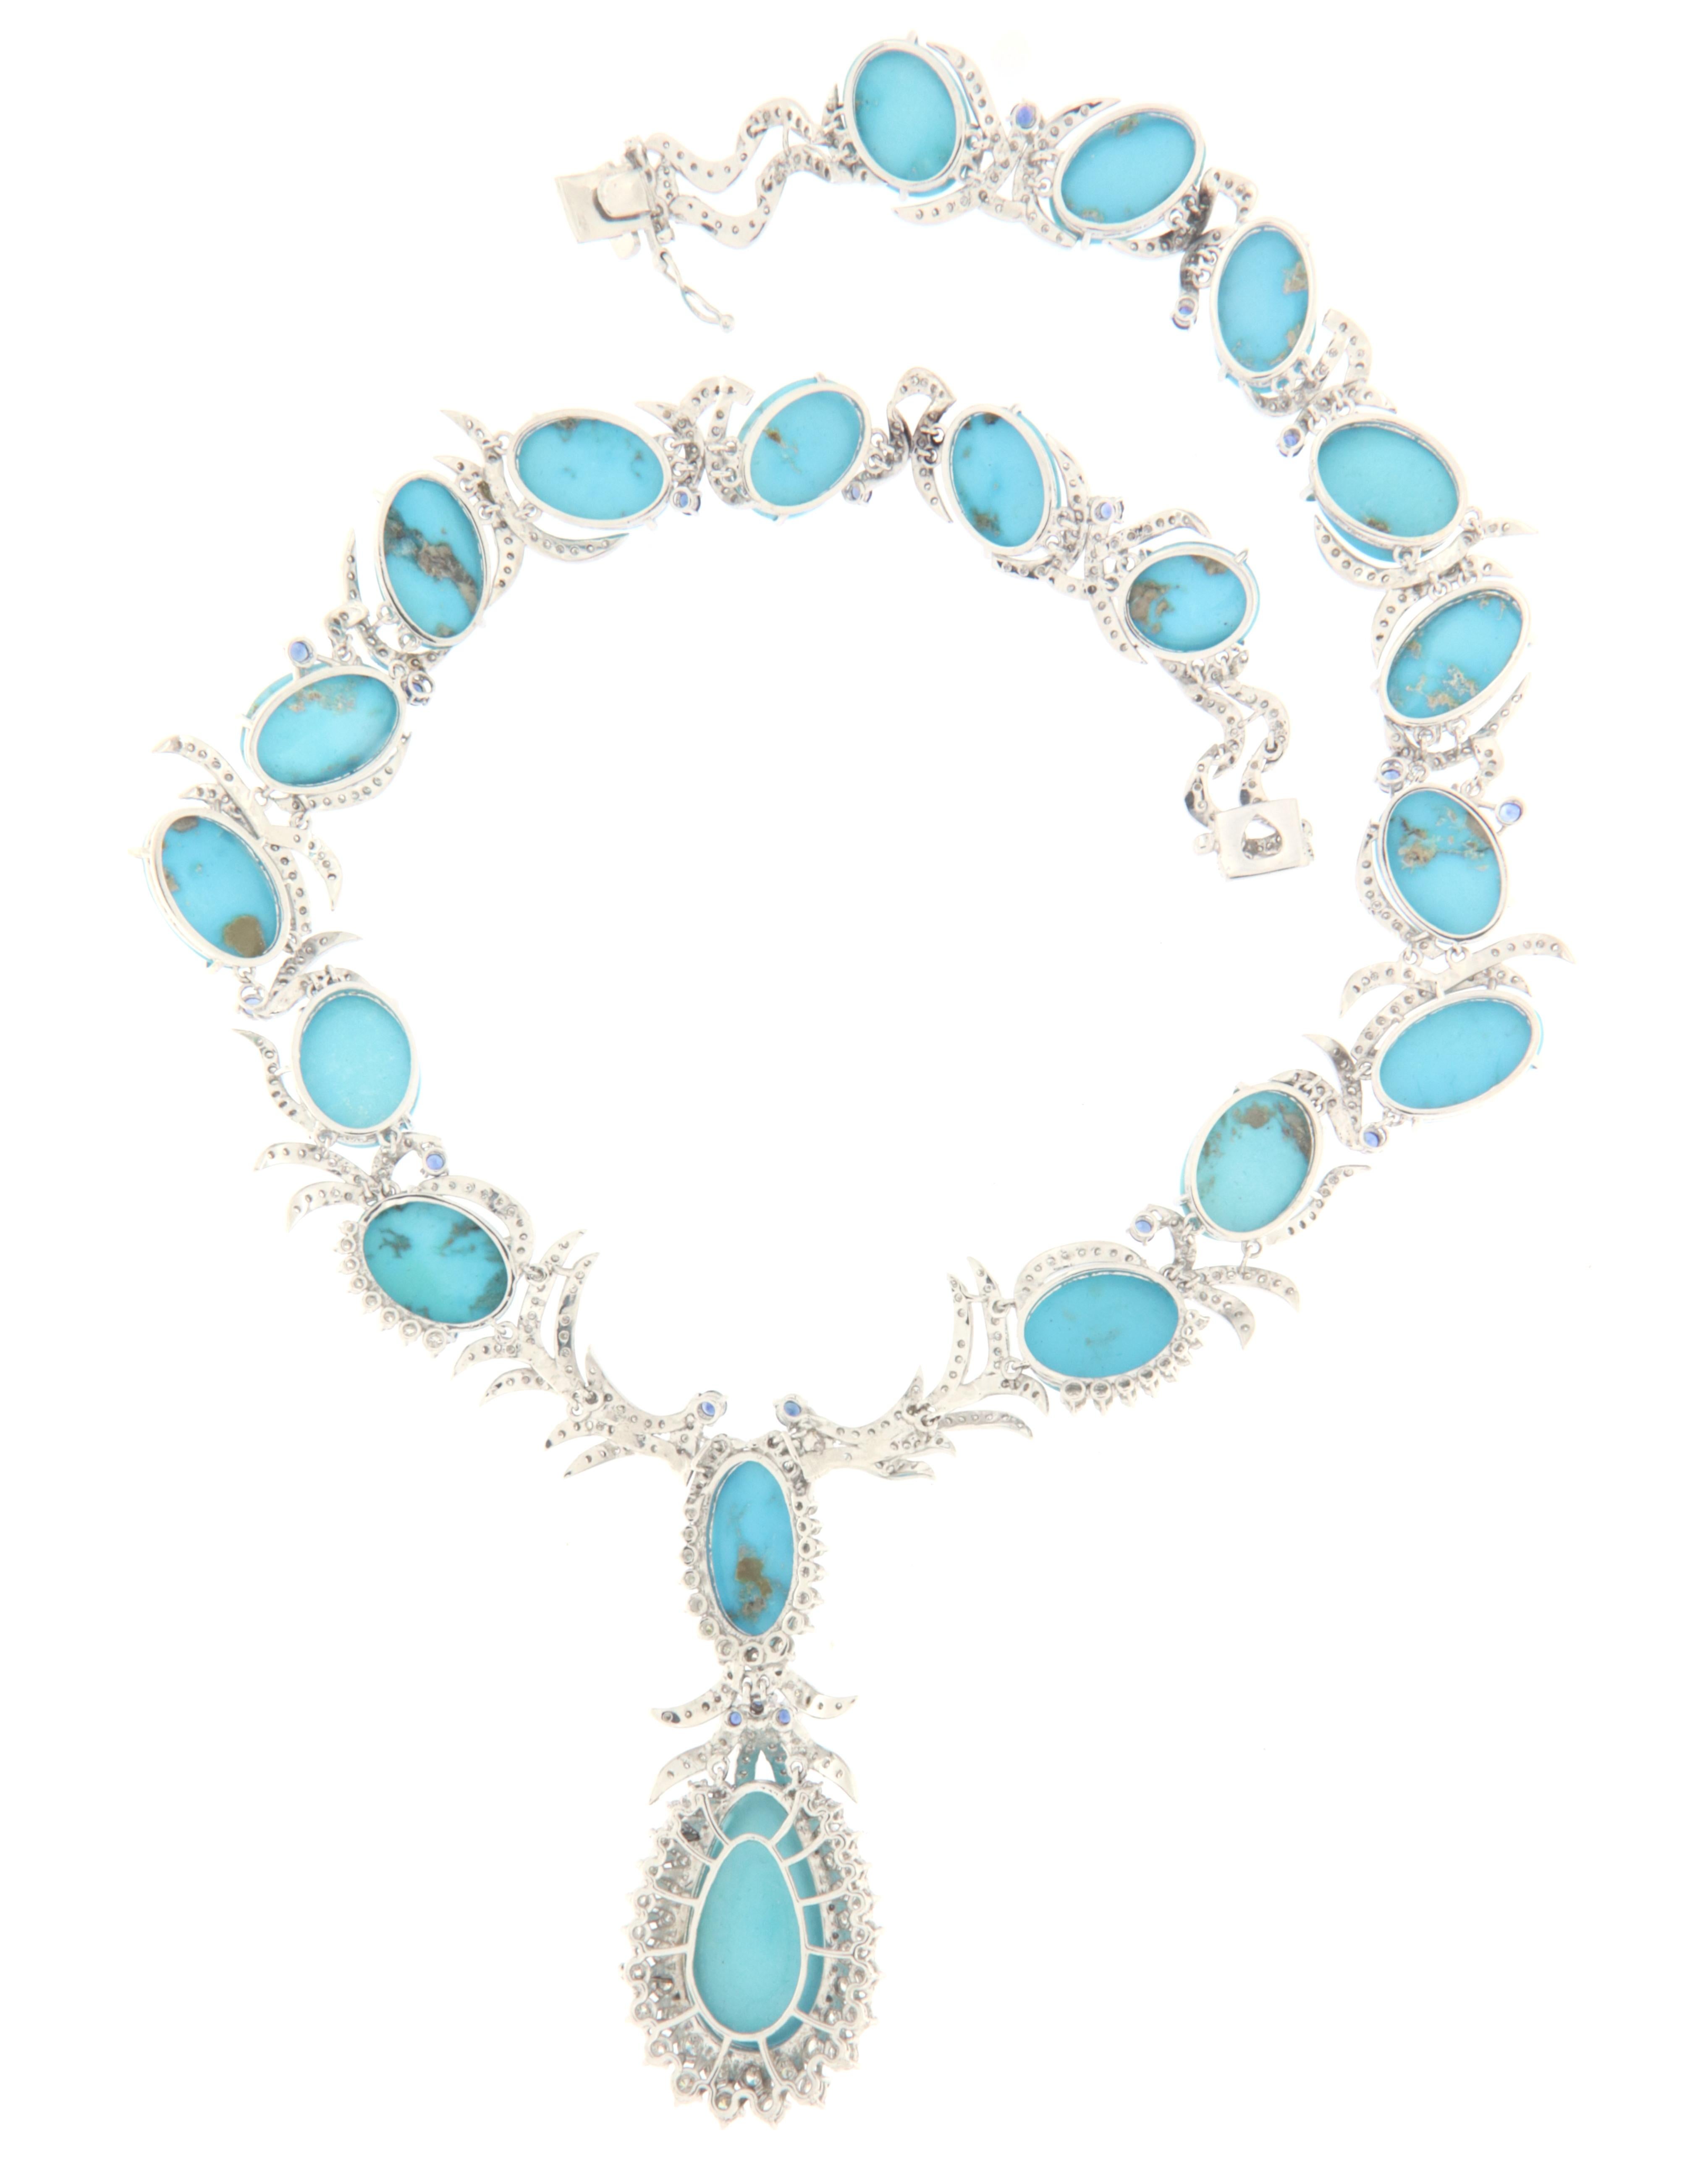 Contemporary Diamonds Sapphires Turquoise White Gold 18 Karat Parure Necklace And Earrings